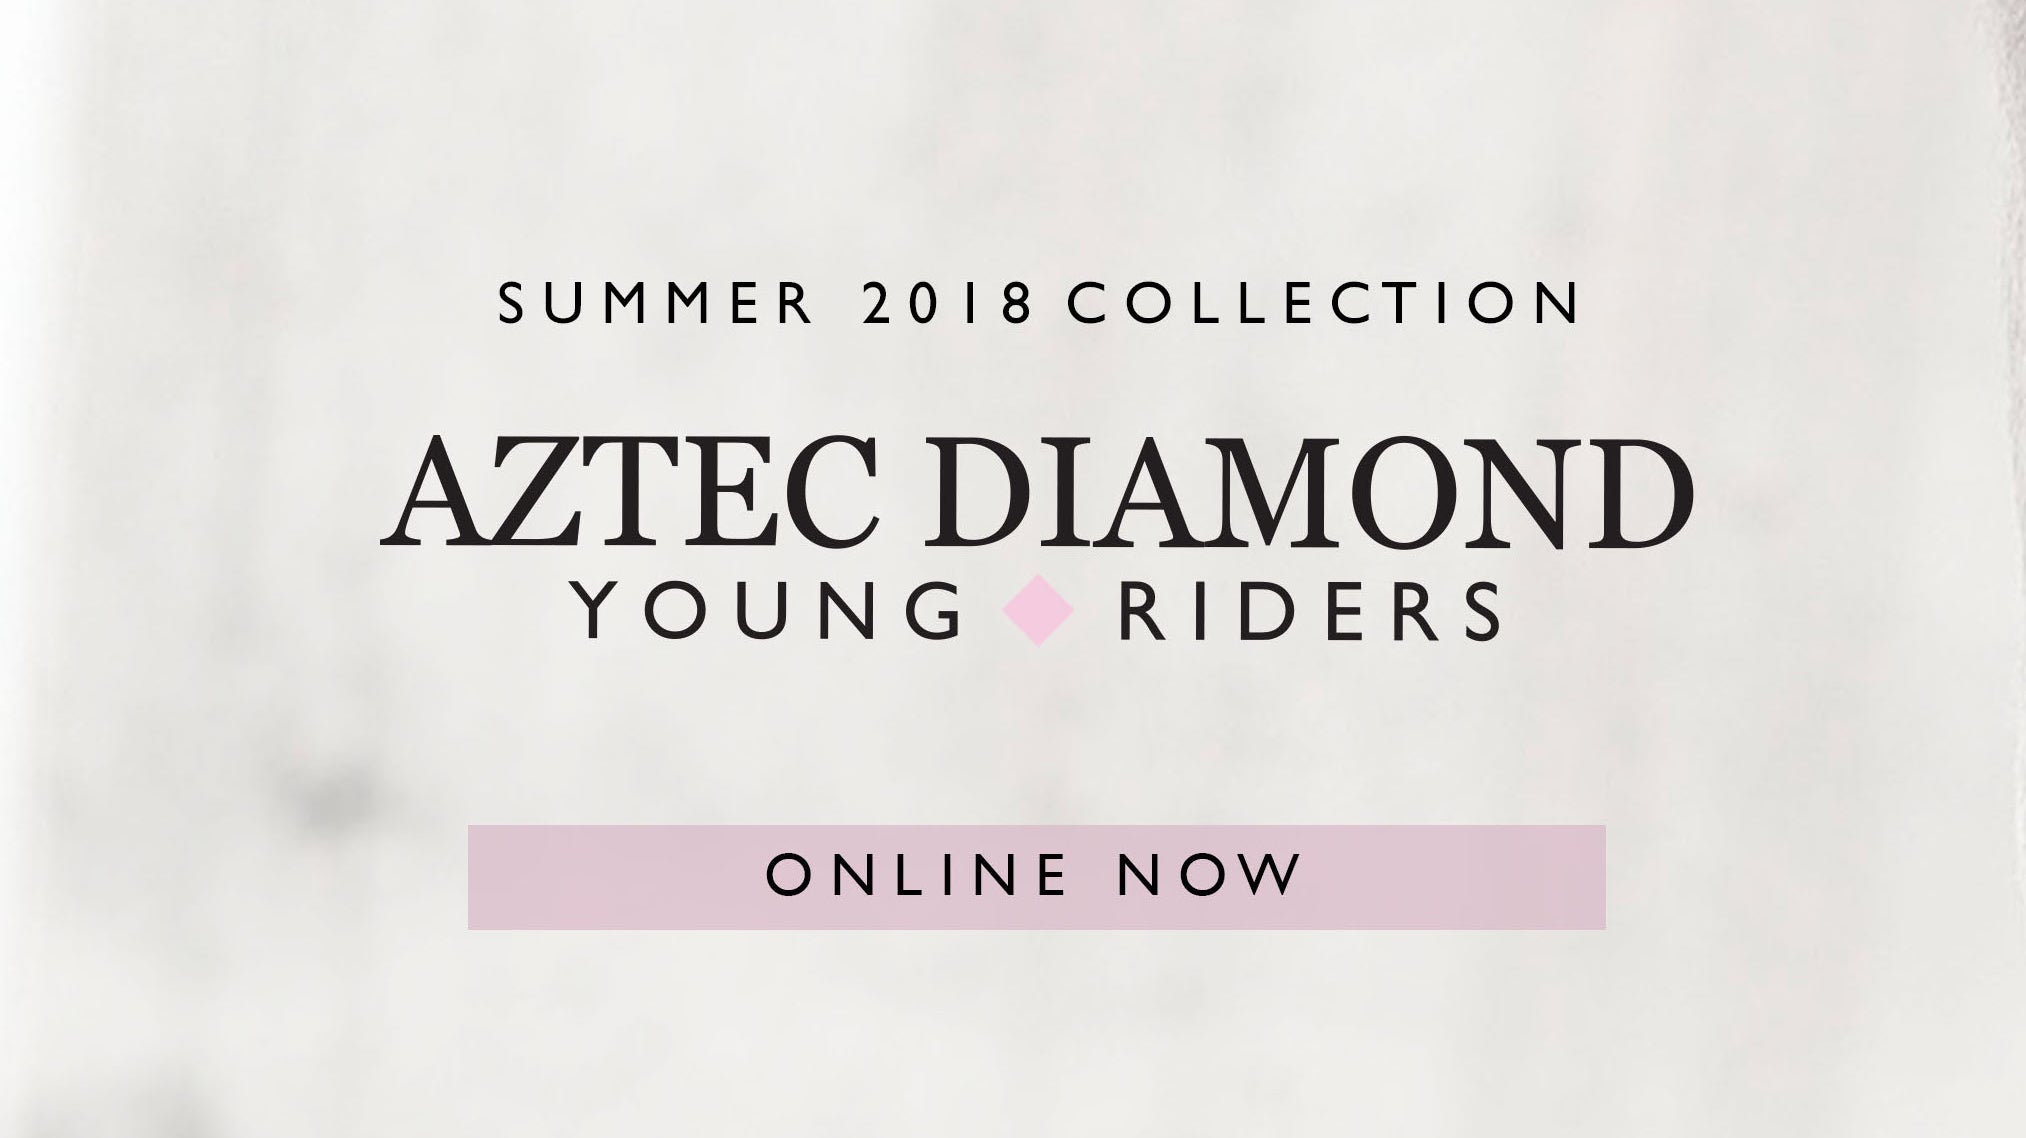 Summer 2018 debut Young Riders collection - Online now